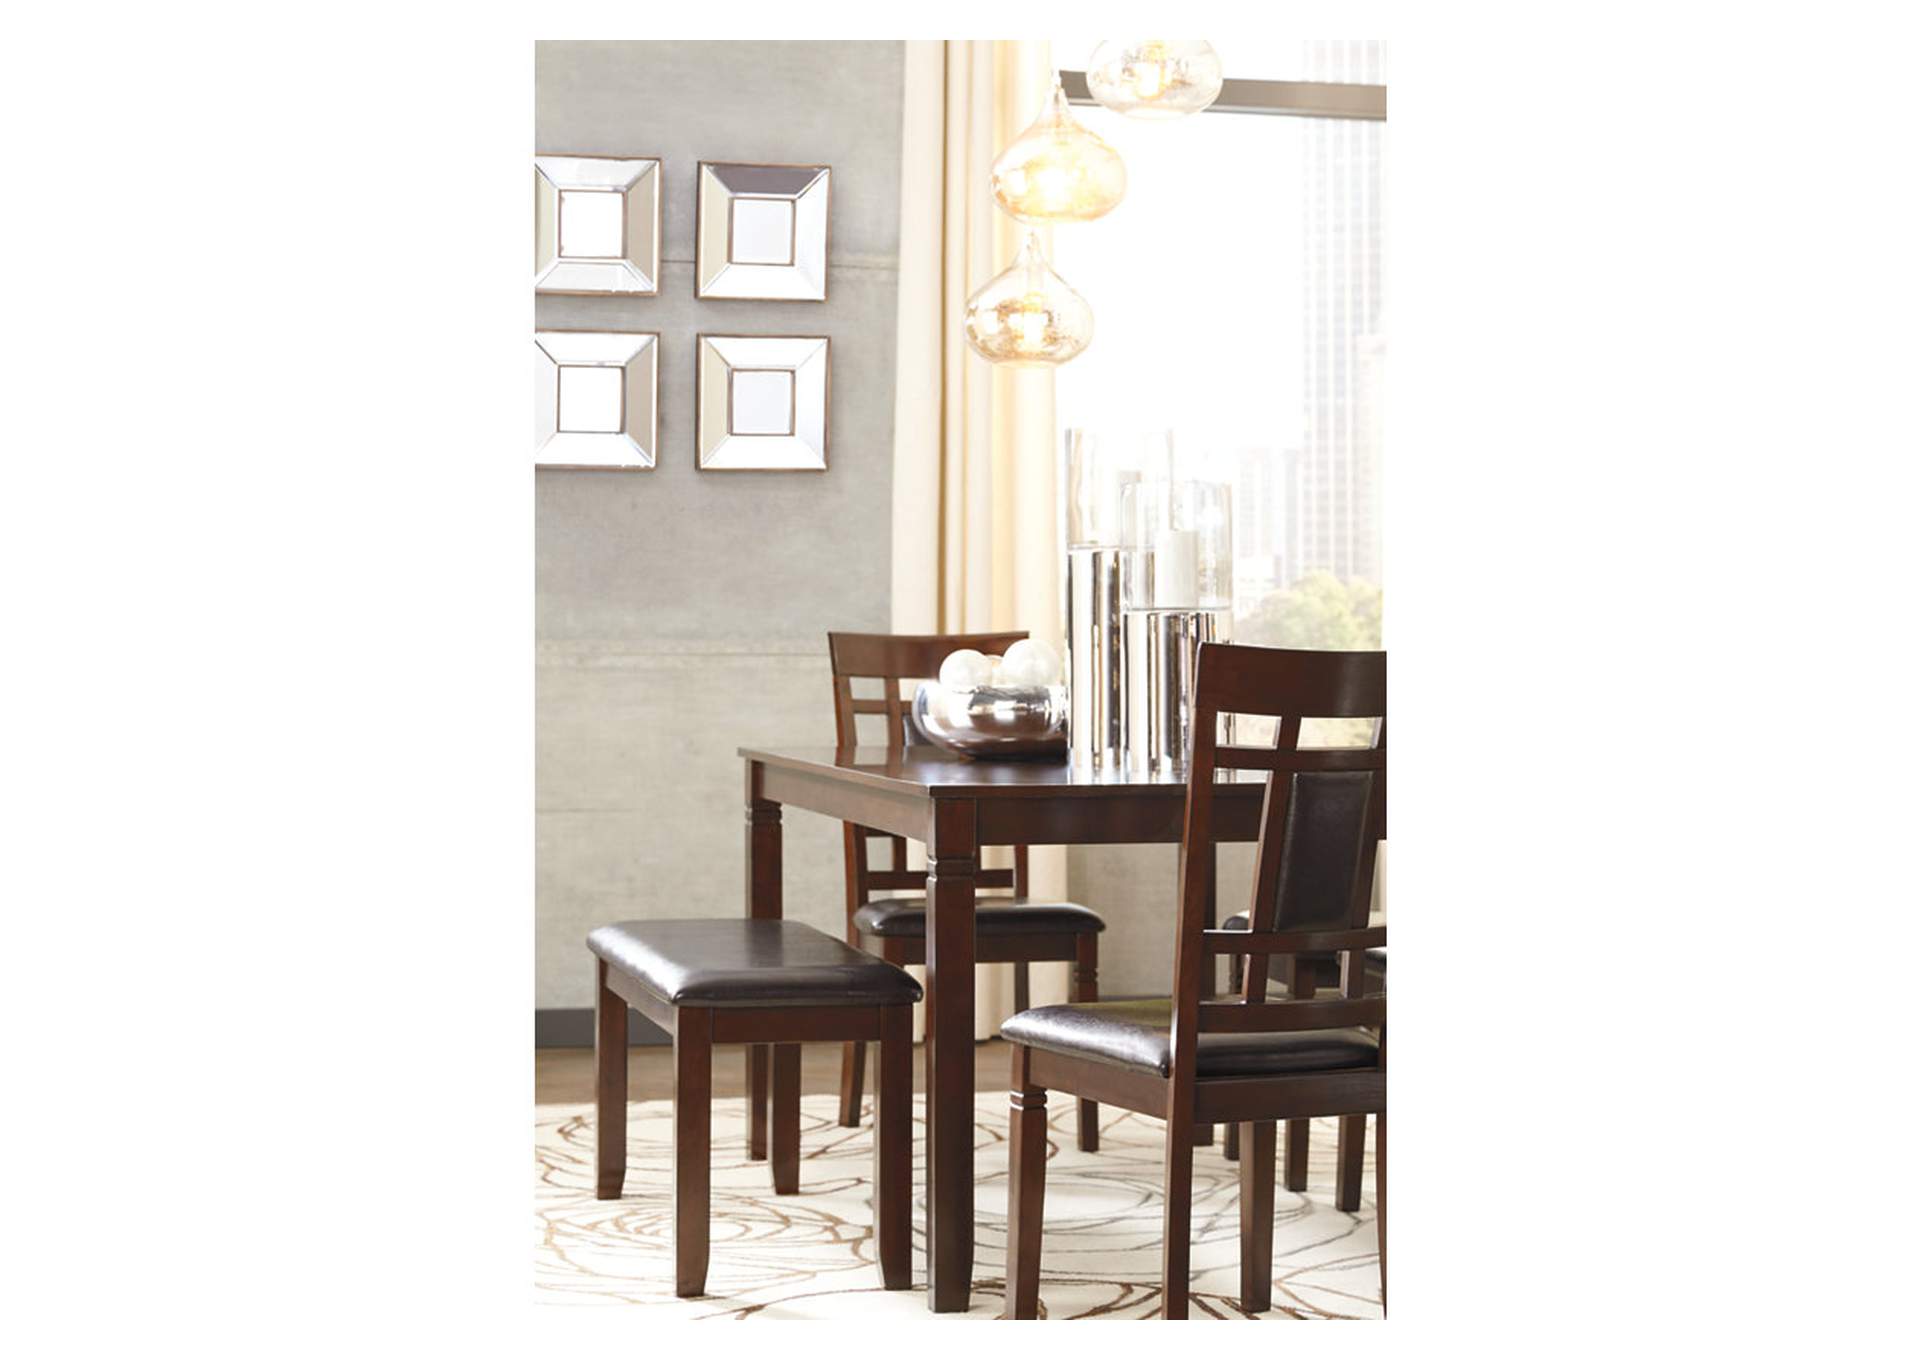 Bennox Dining Table And Chairs With Bench (Set Of 6),Signature Design By Ashley